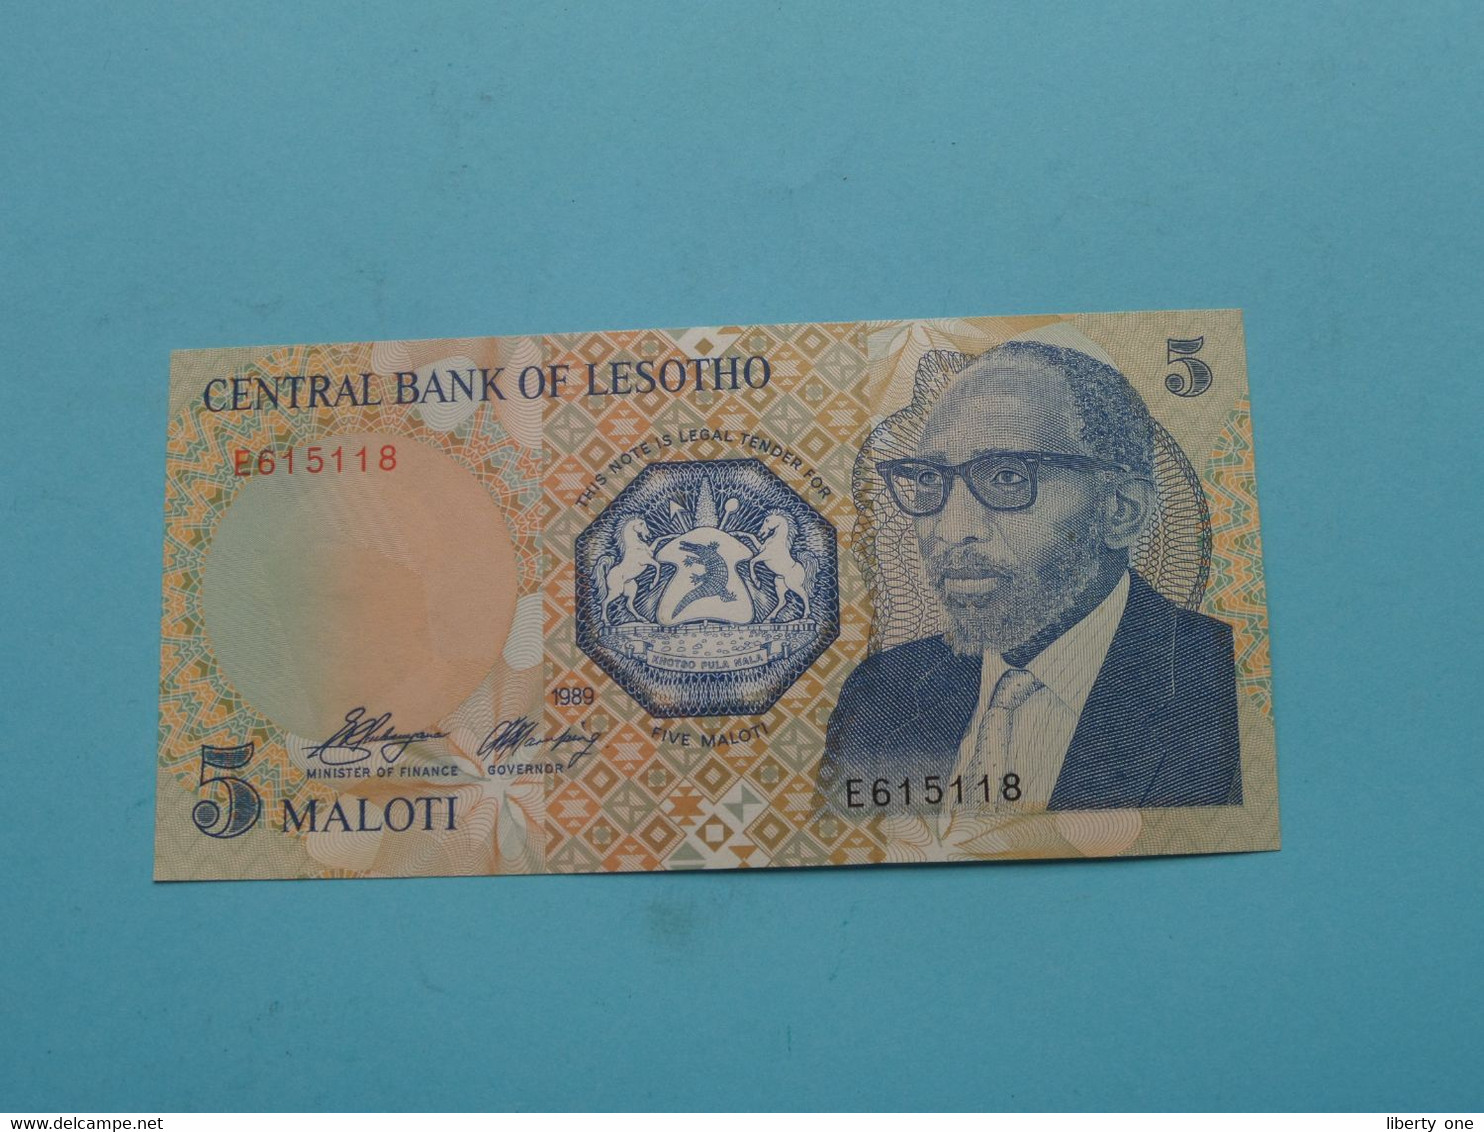 5 Maloti ( E615118 ) Central Bank Of LESOTHO - 1989 ( For Grade See SCANS ) UNC ! - Lesotho